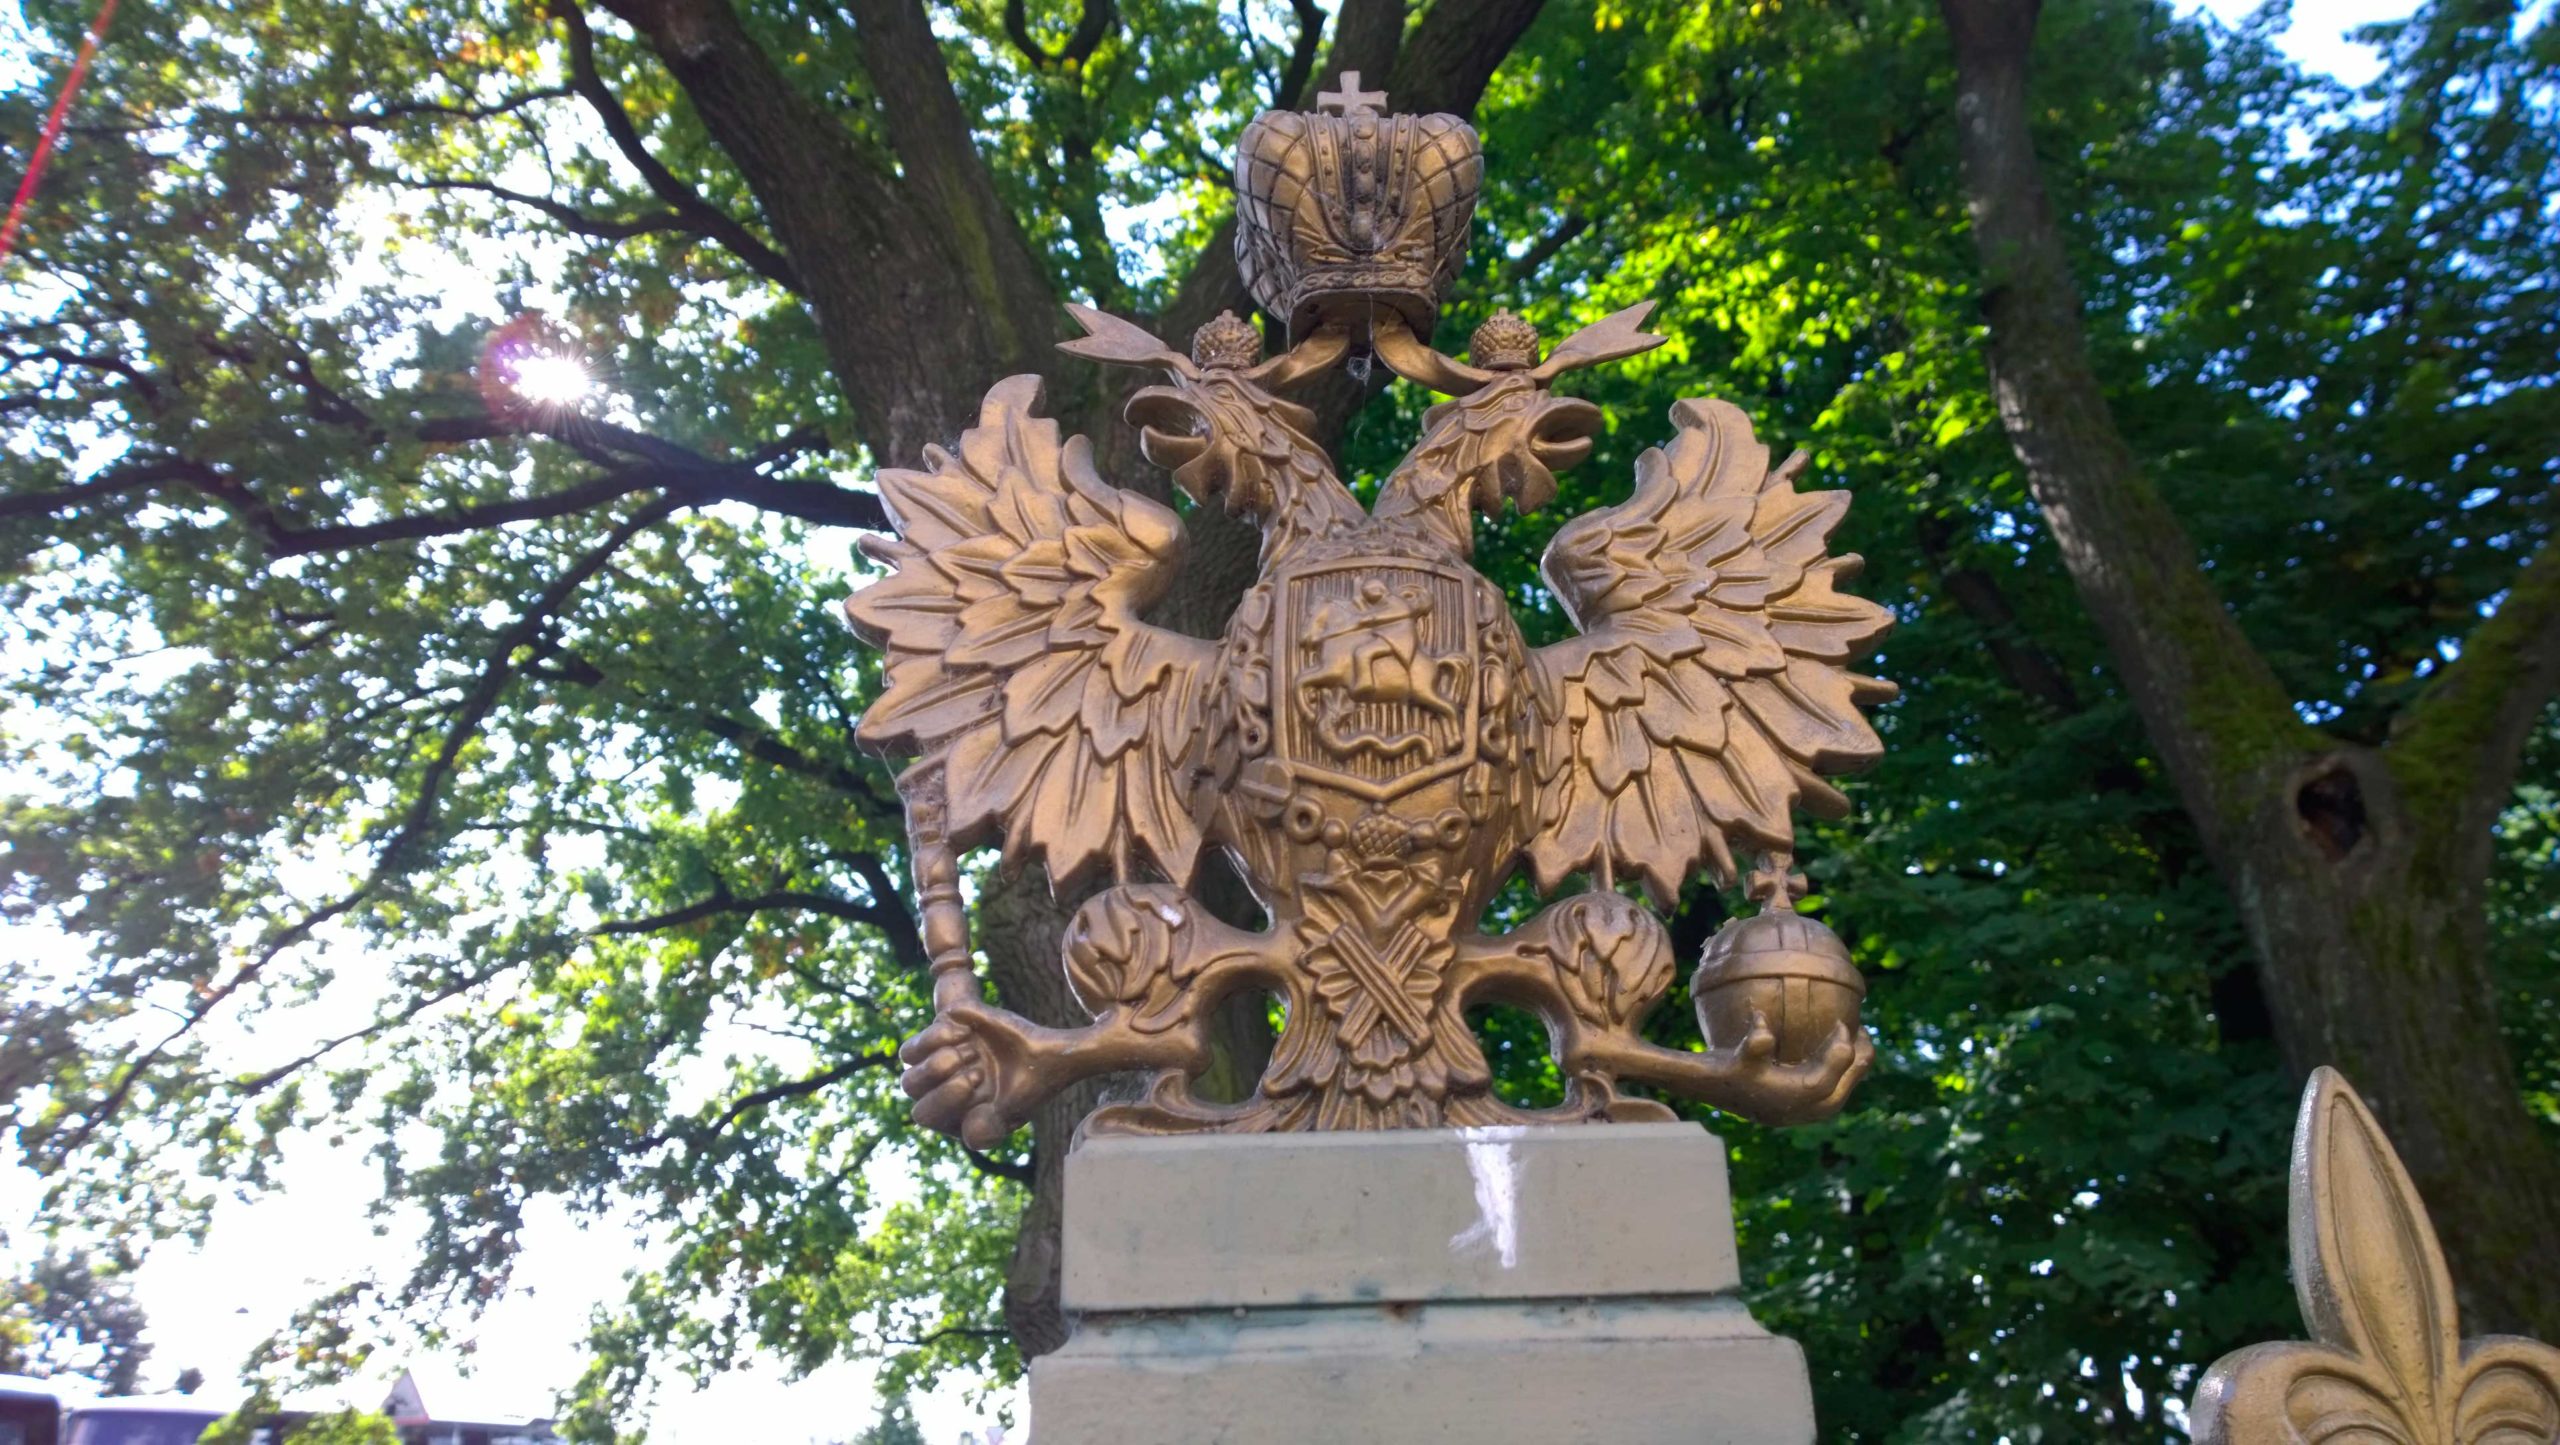 The Russian double-headed eagle. Photo: Morf Morford